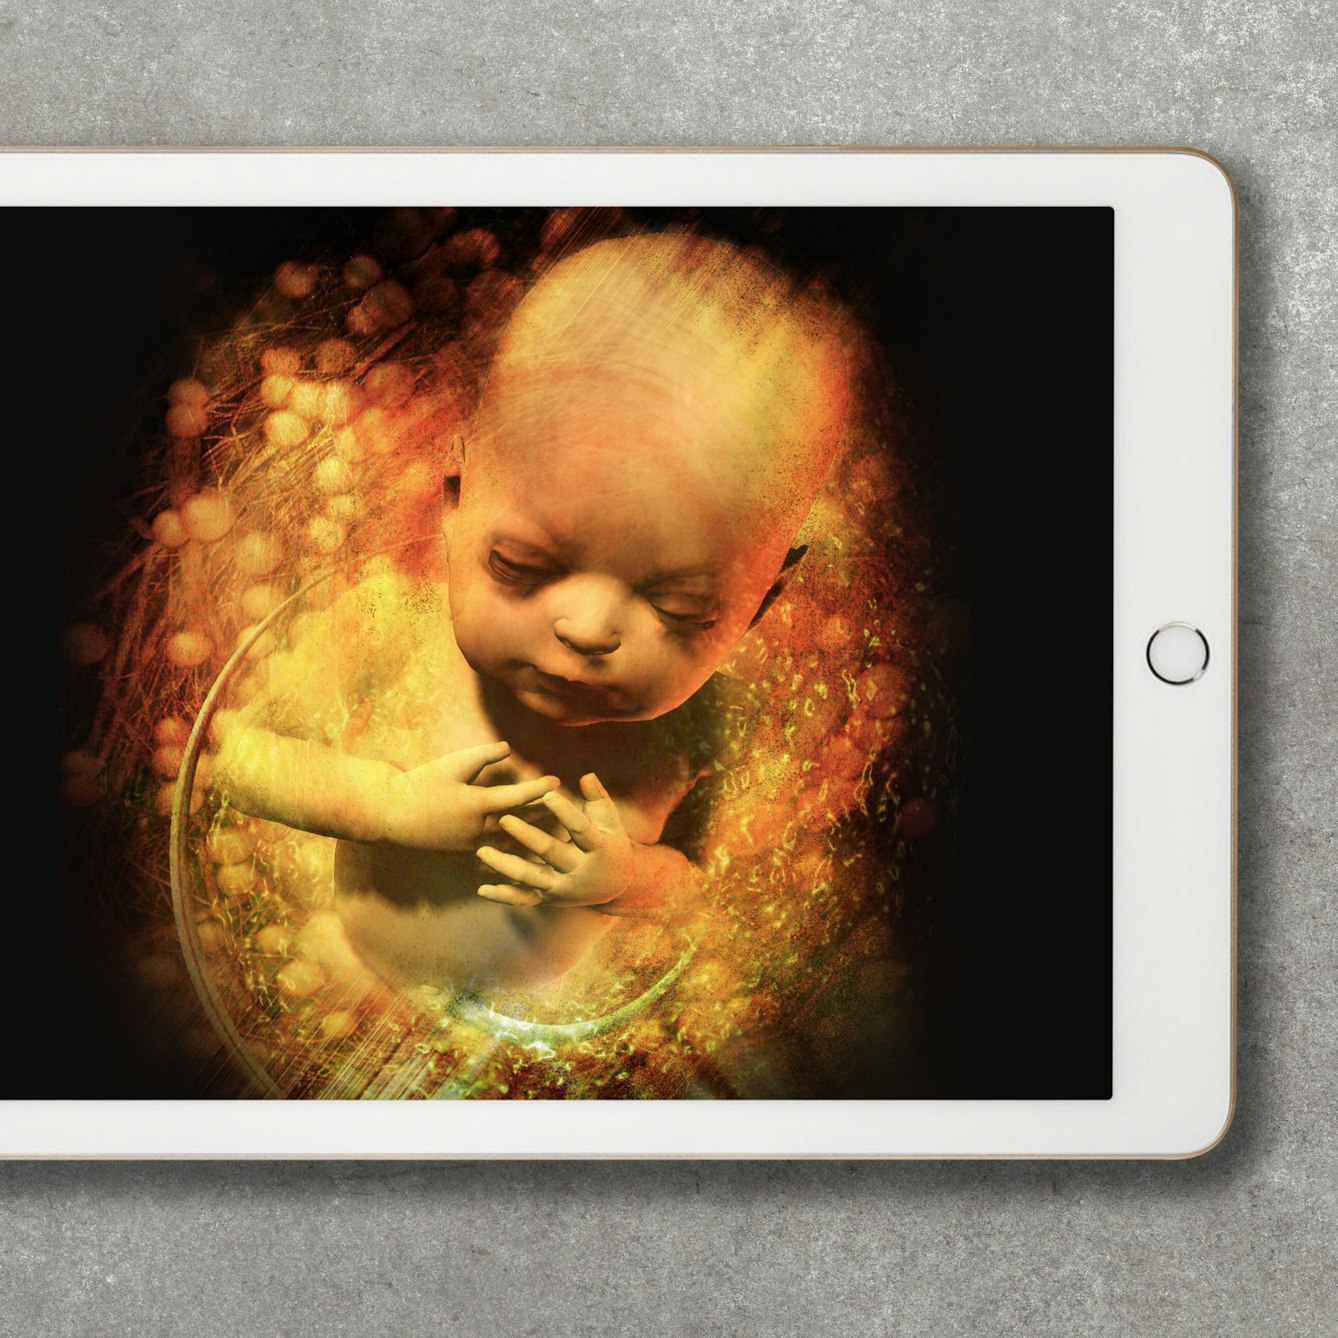 Photograph of a white tablet device resting on a grey concrete textured background. On the screen is a colour illustration of a baby in the womb. The head, shoulders and chest of the baby is visible, and it is surrounded by swirling abstract patterns. The baby has its eyes closed and its arms crossed in front of it, with its hands resting lightly on its chest. 